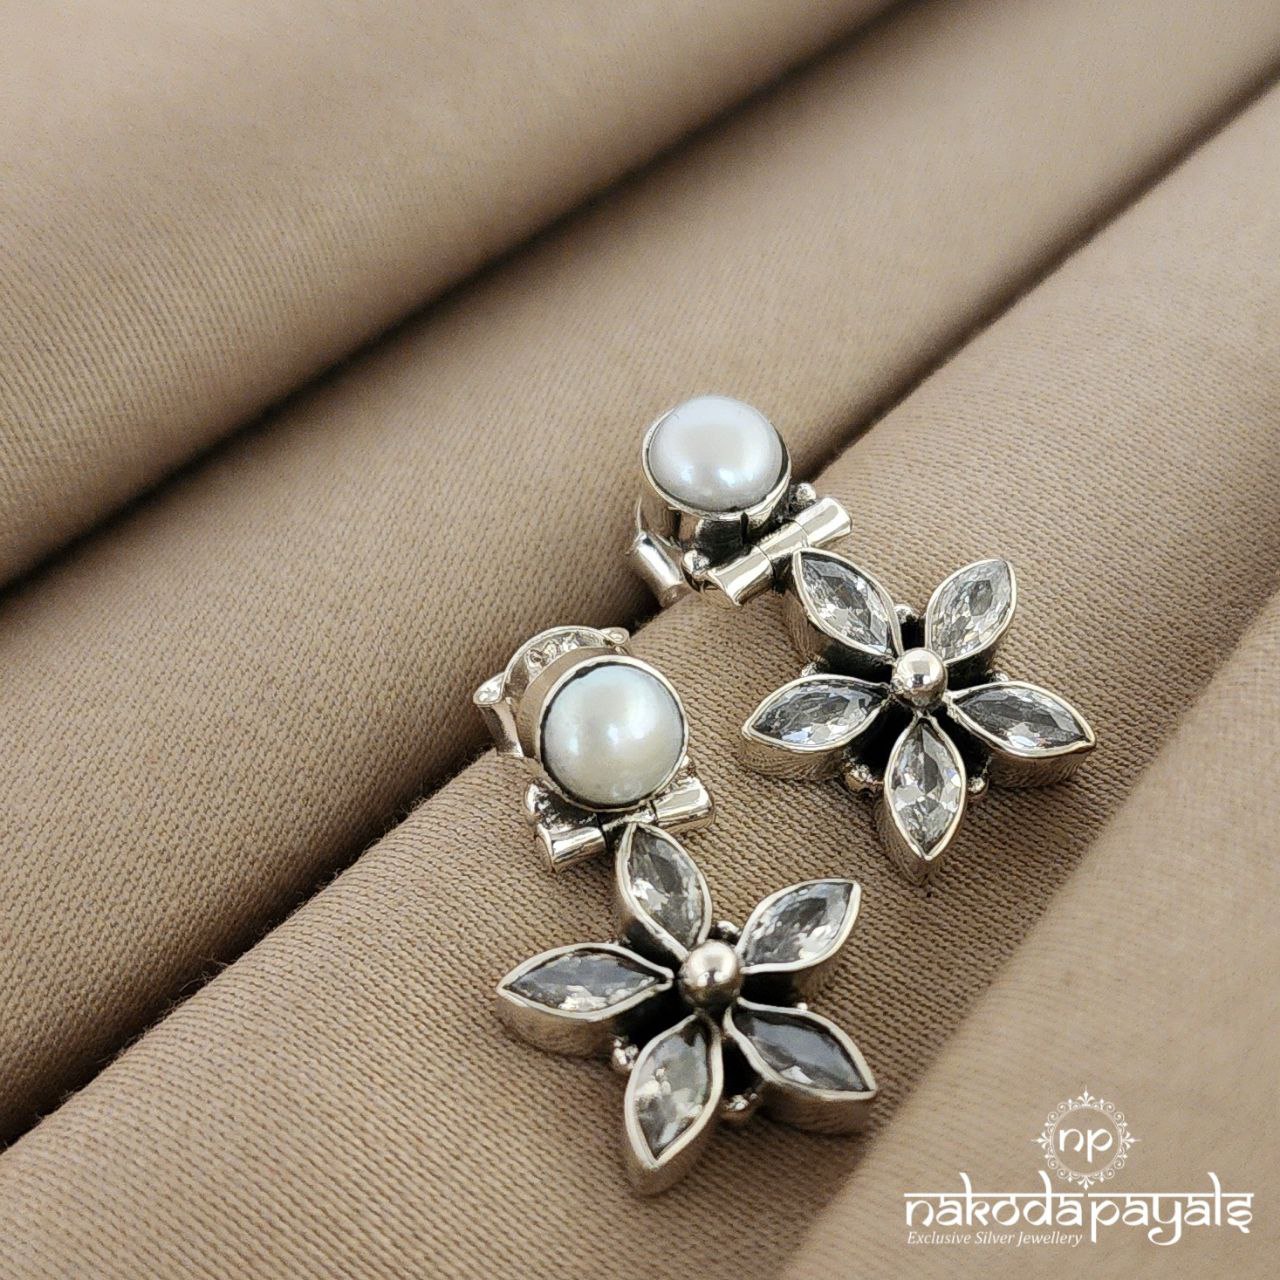 Floral Studs (S8824)